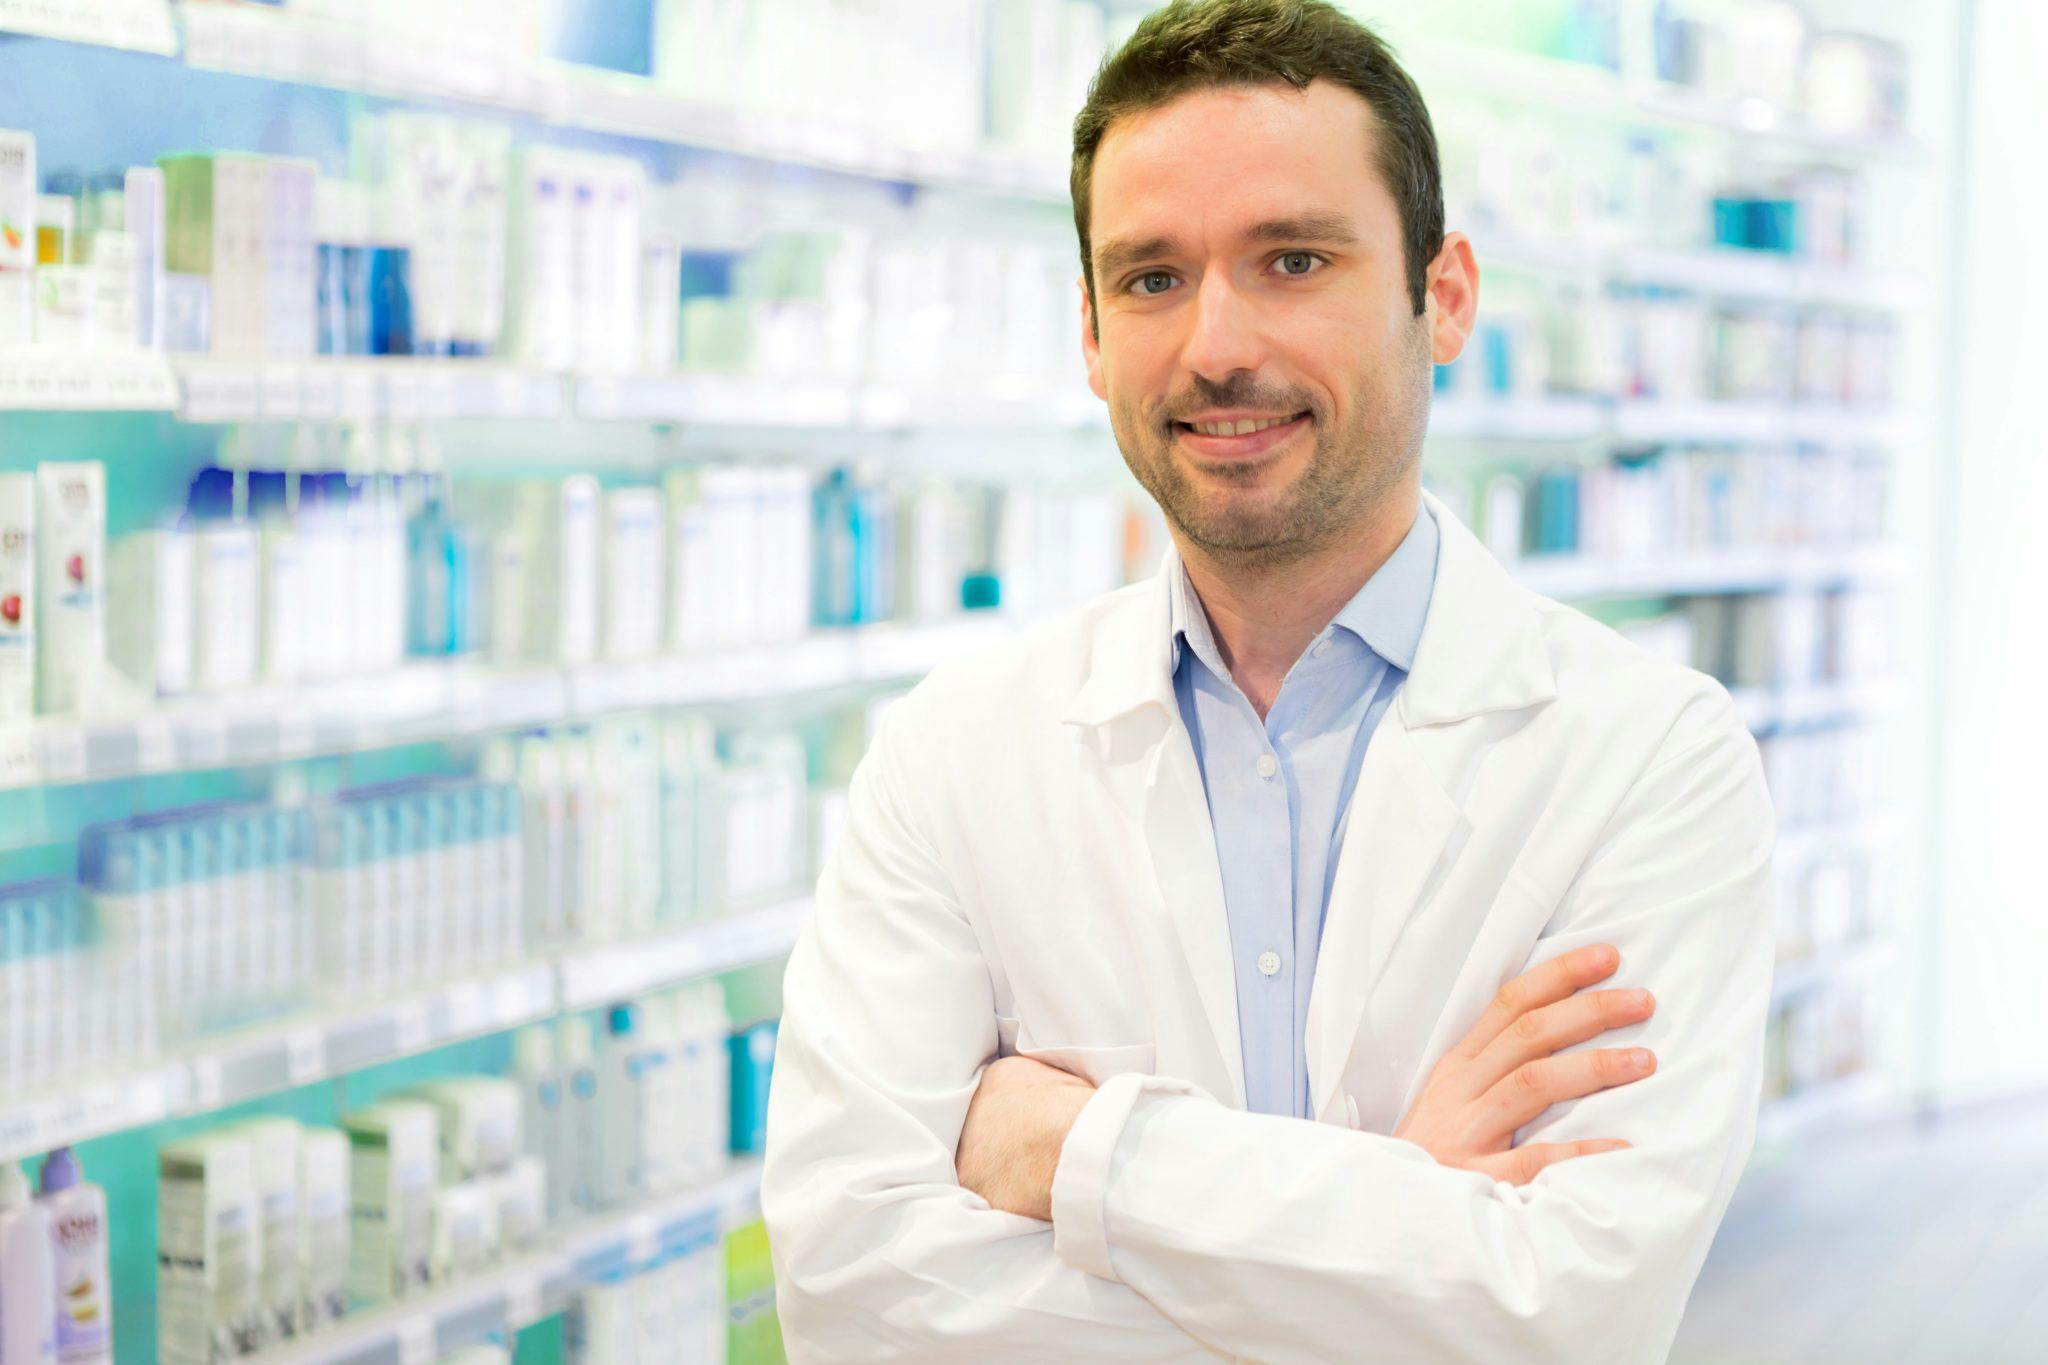 Advice for Pharmacists to Get Involved in Trade Associations, Working with Legislators